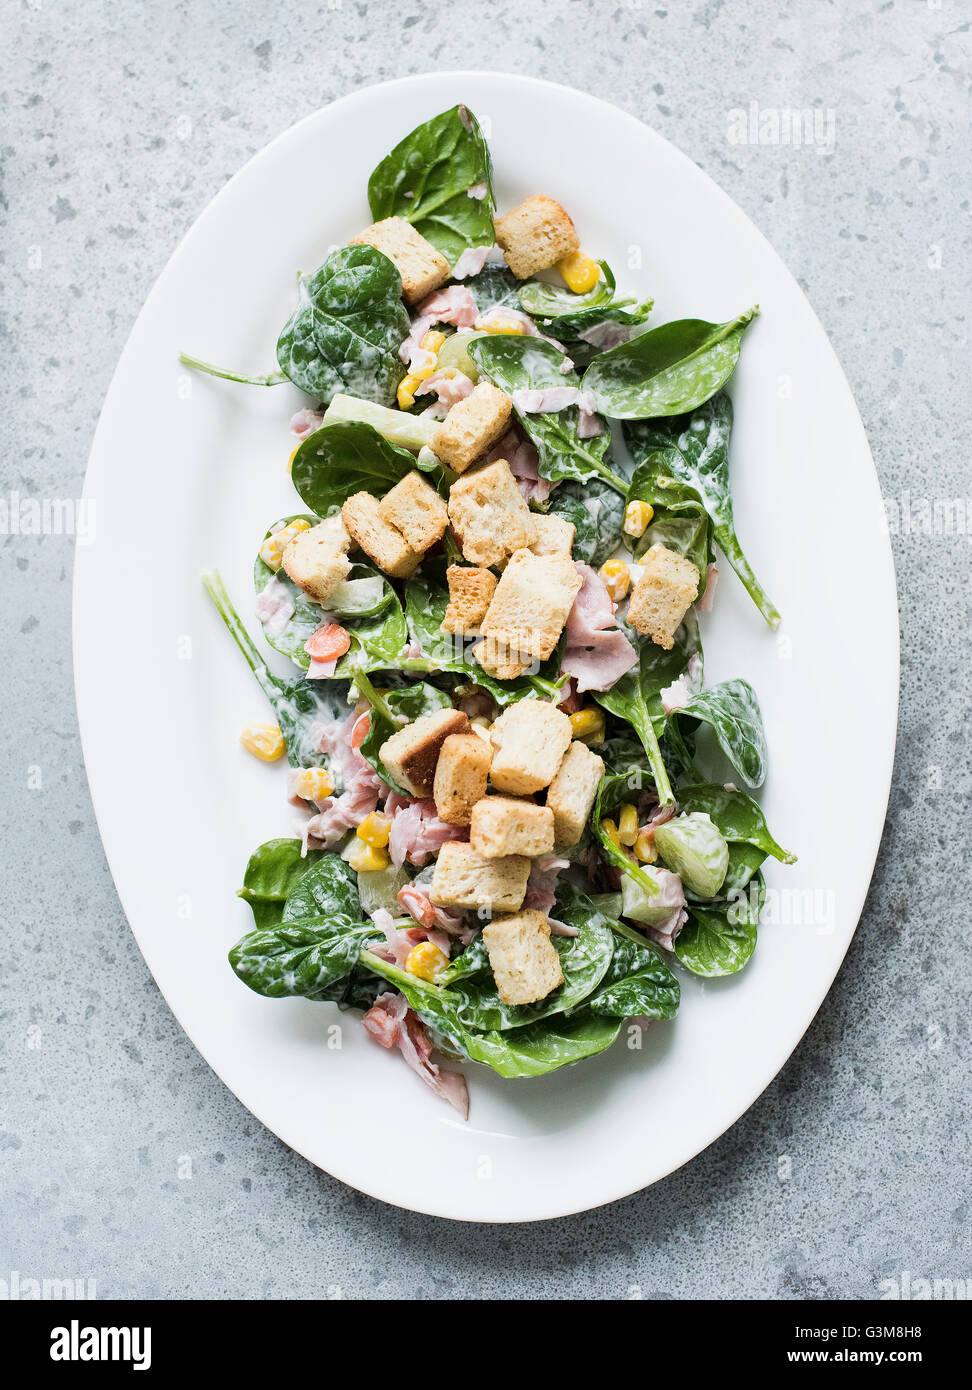 Spinach salad with ham and focaccia crouton Stock Photo